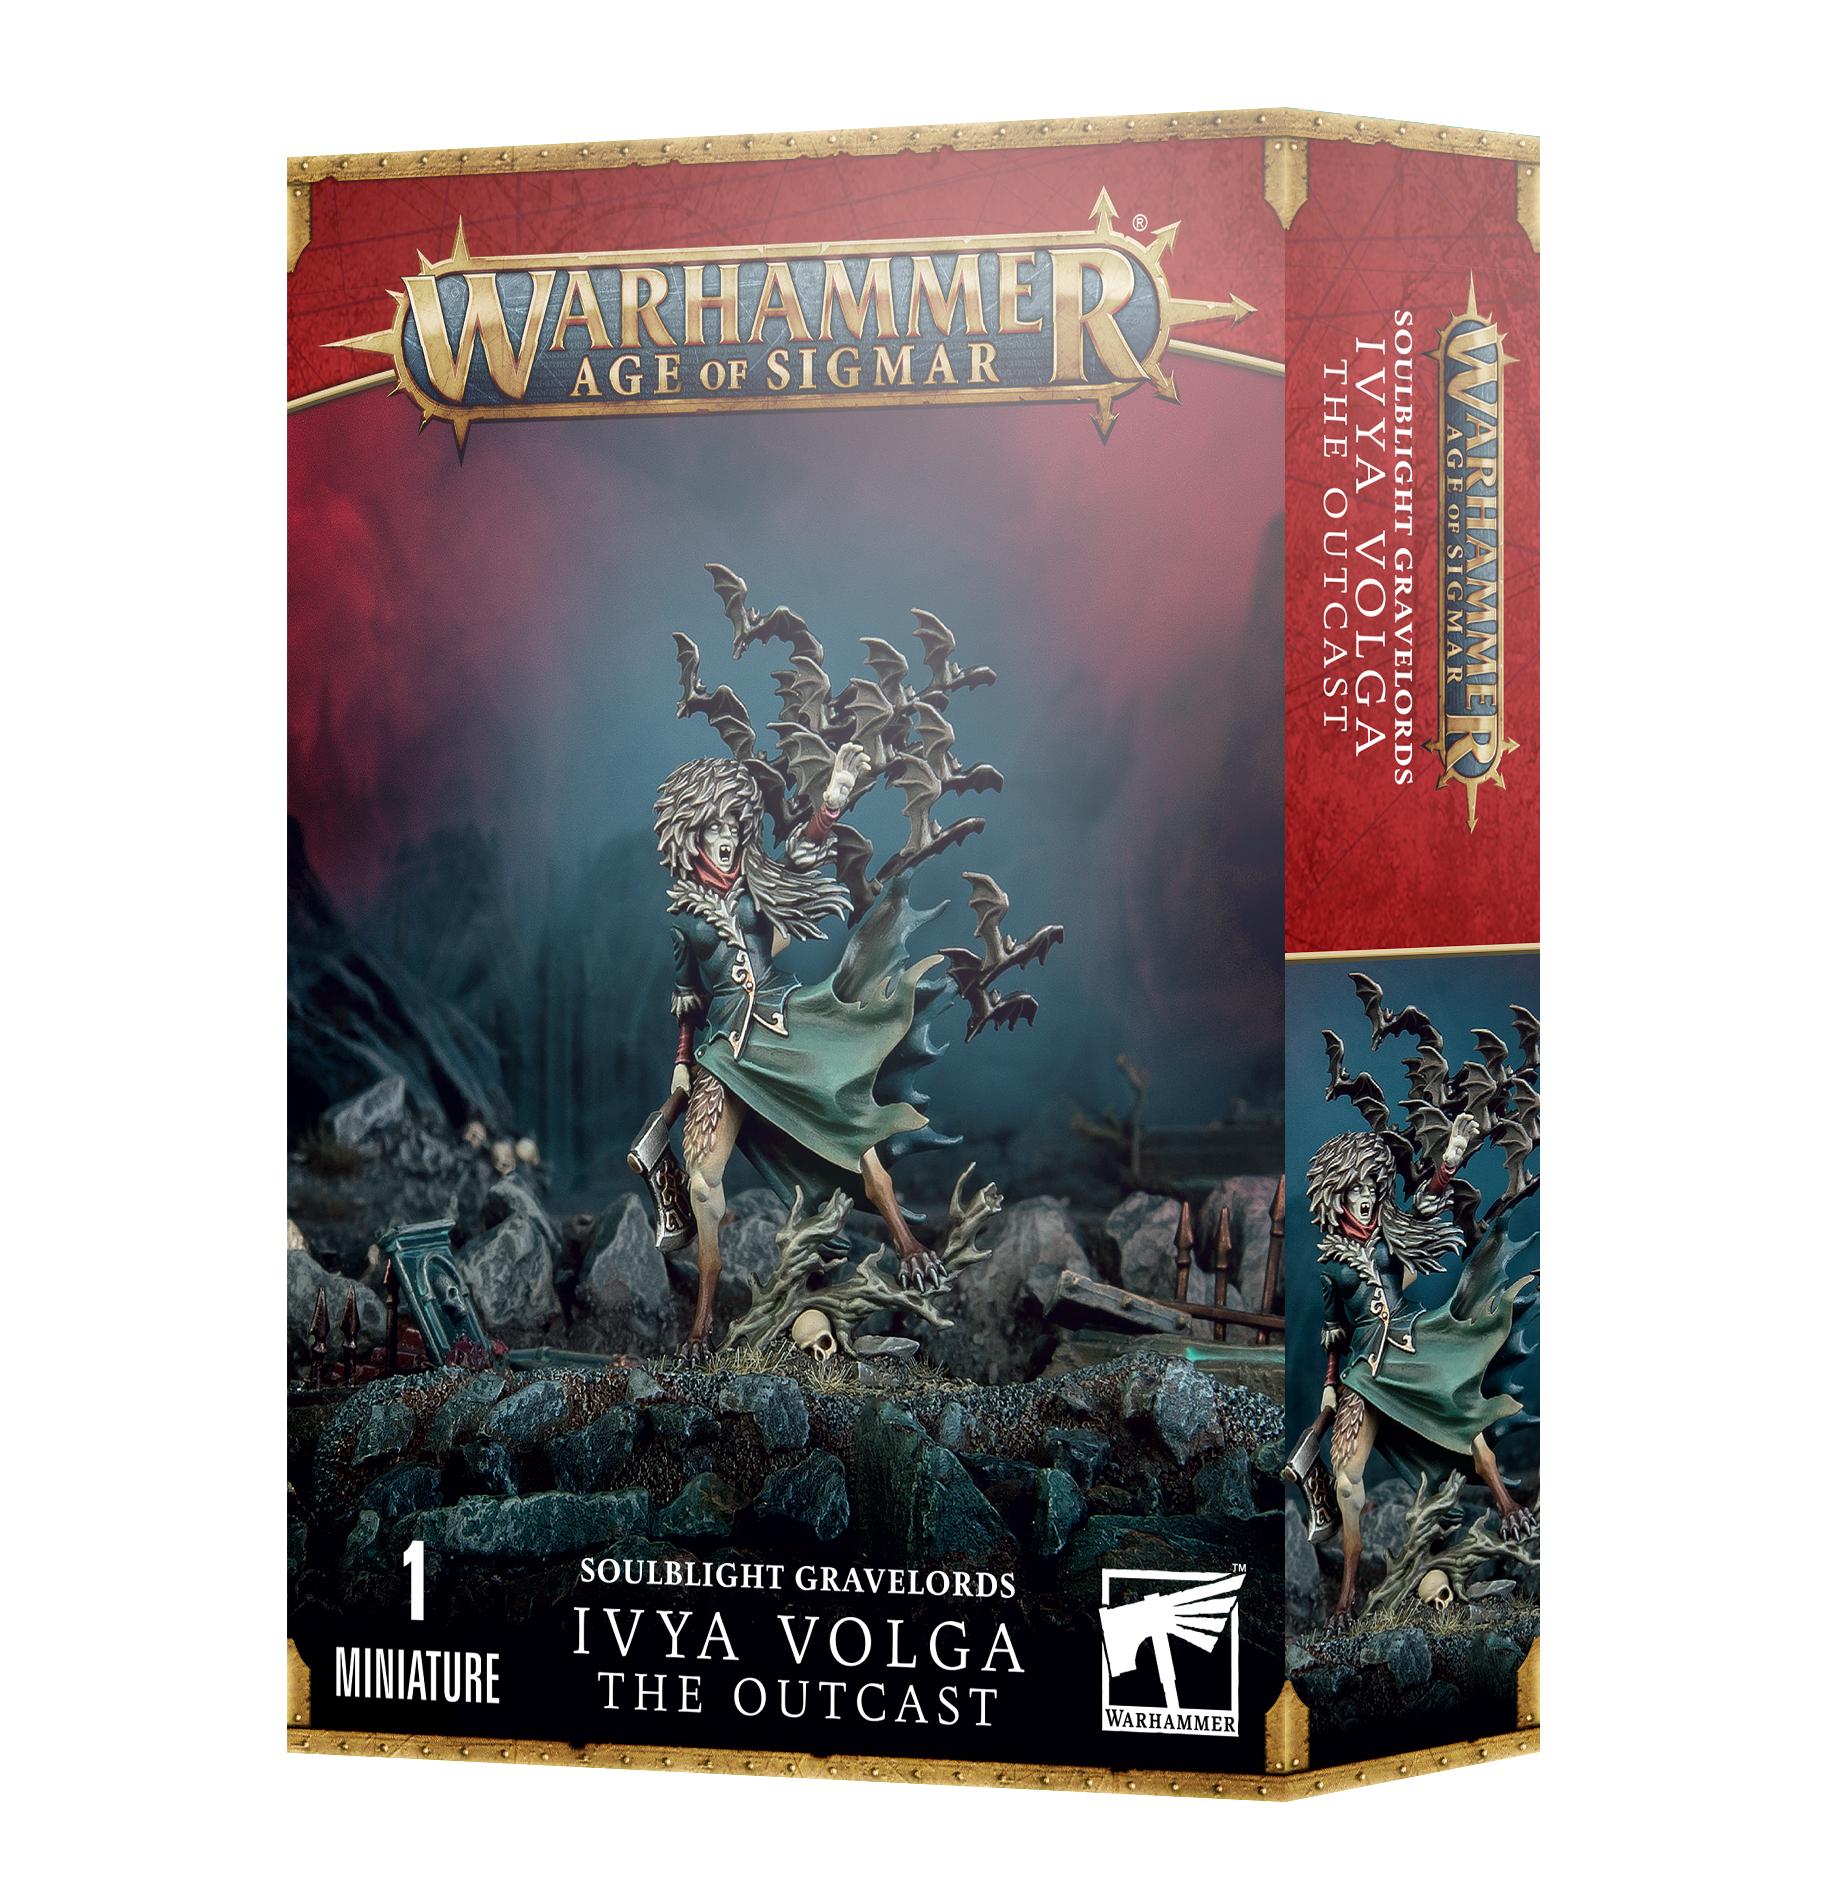 Warhammer: Age of Sigmar - Soulblight Gravelords: Ivya Volga, The Outcast